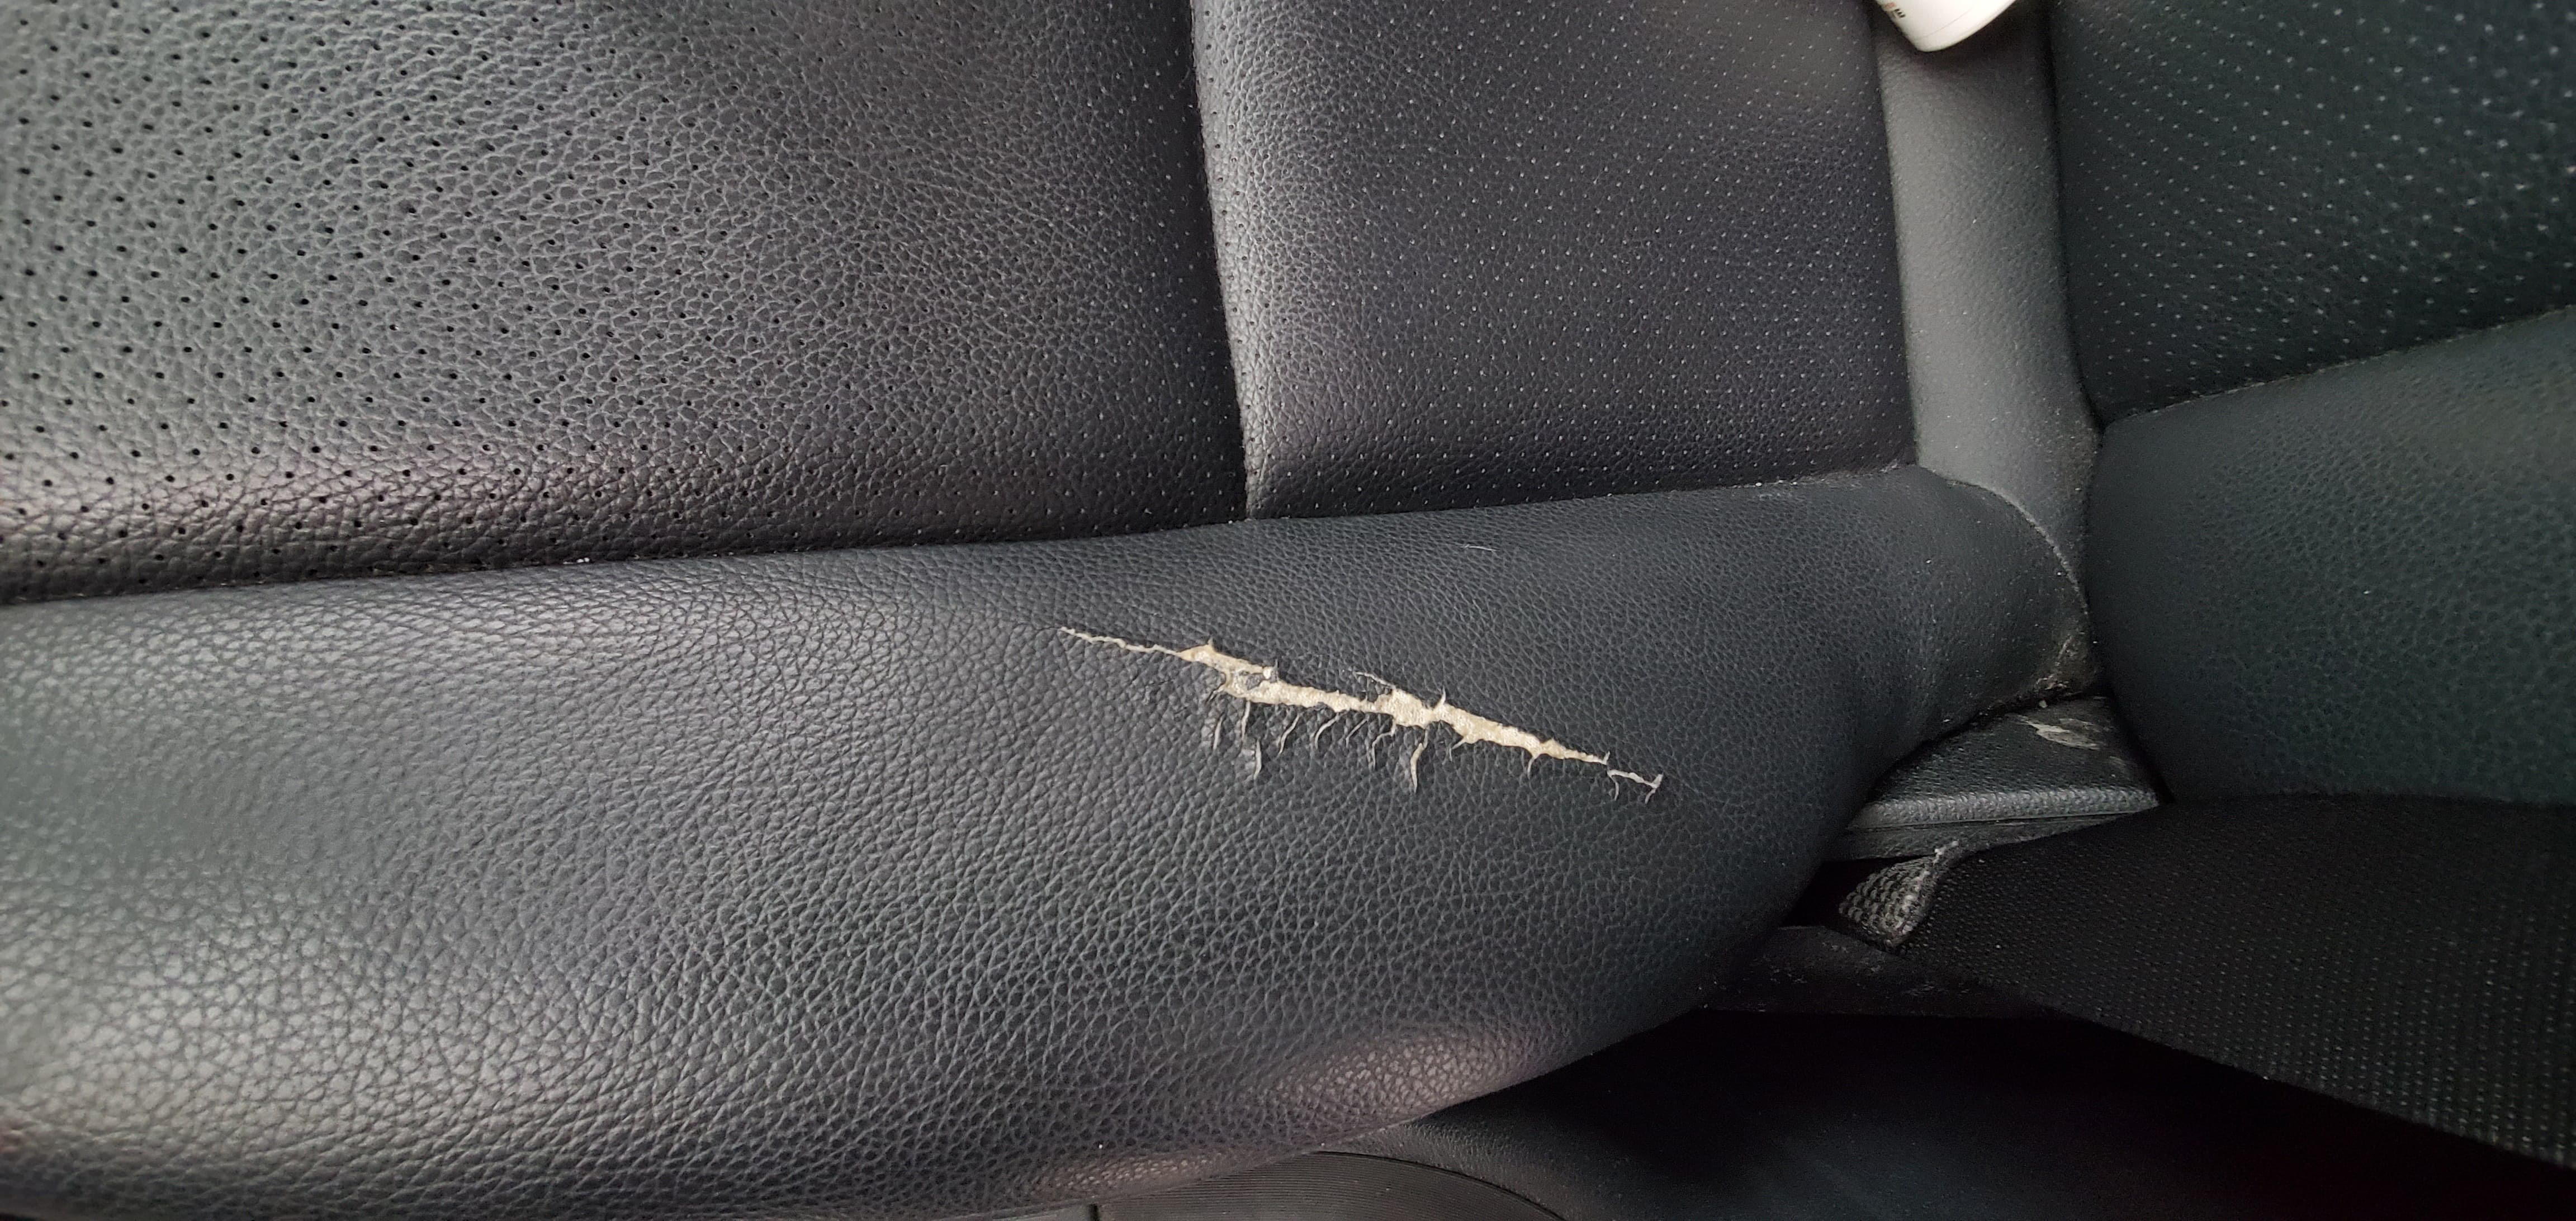 How To Repair A Leather Car Seat, How Much To Repair Small Tear In Leather Car Seat